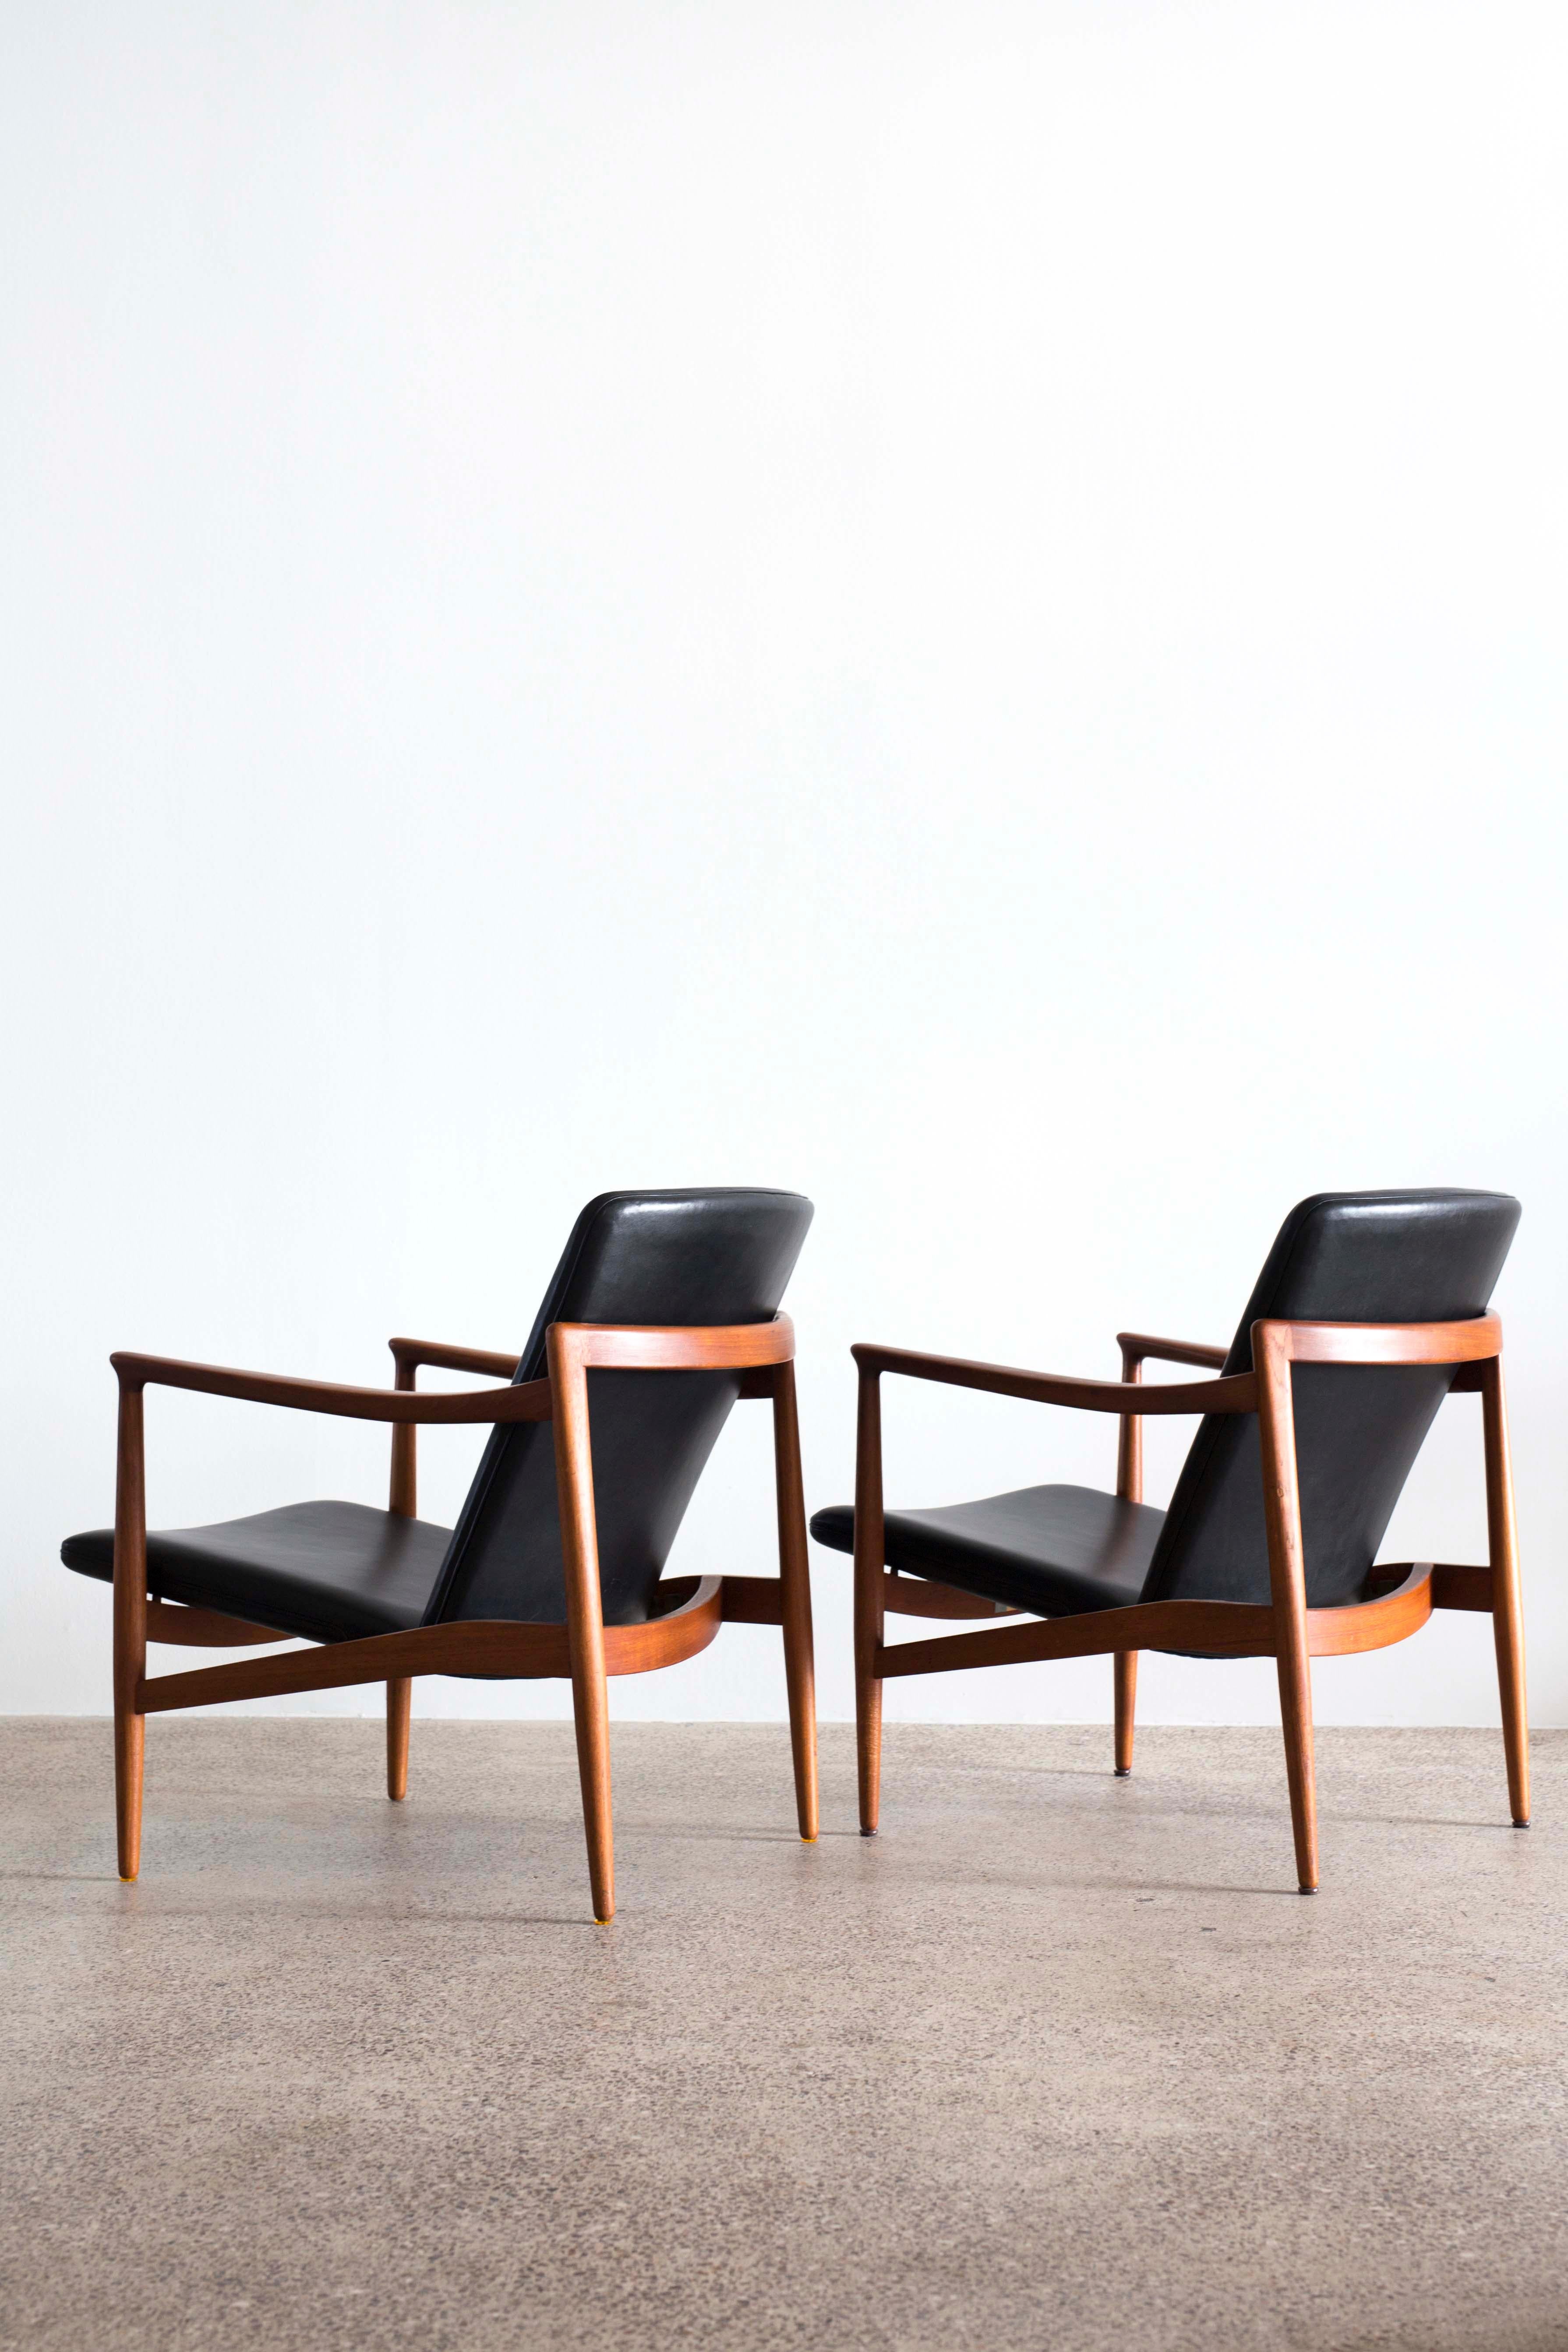 A pair of teak easy chairs designed and executed by Jacob Kjaer, Denmark.
Designed 1954 and made in 1962.
Black dyed natural leather upholstery, brass fittings and adjustable back.